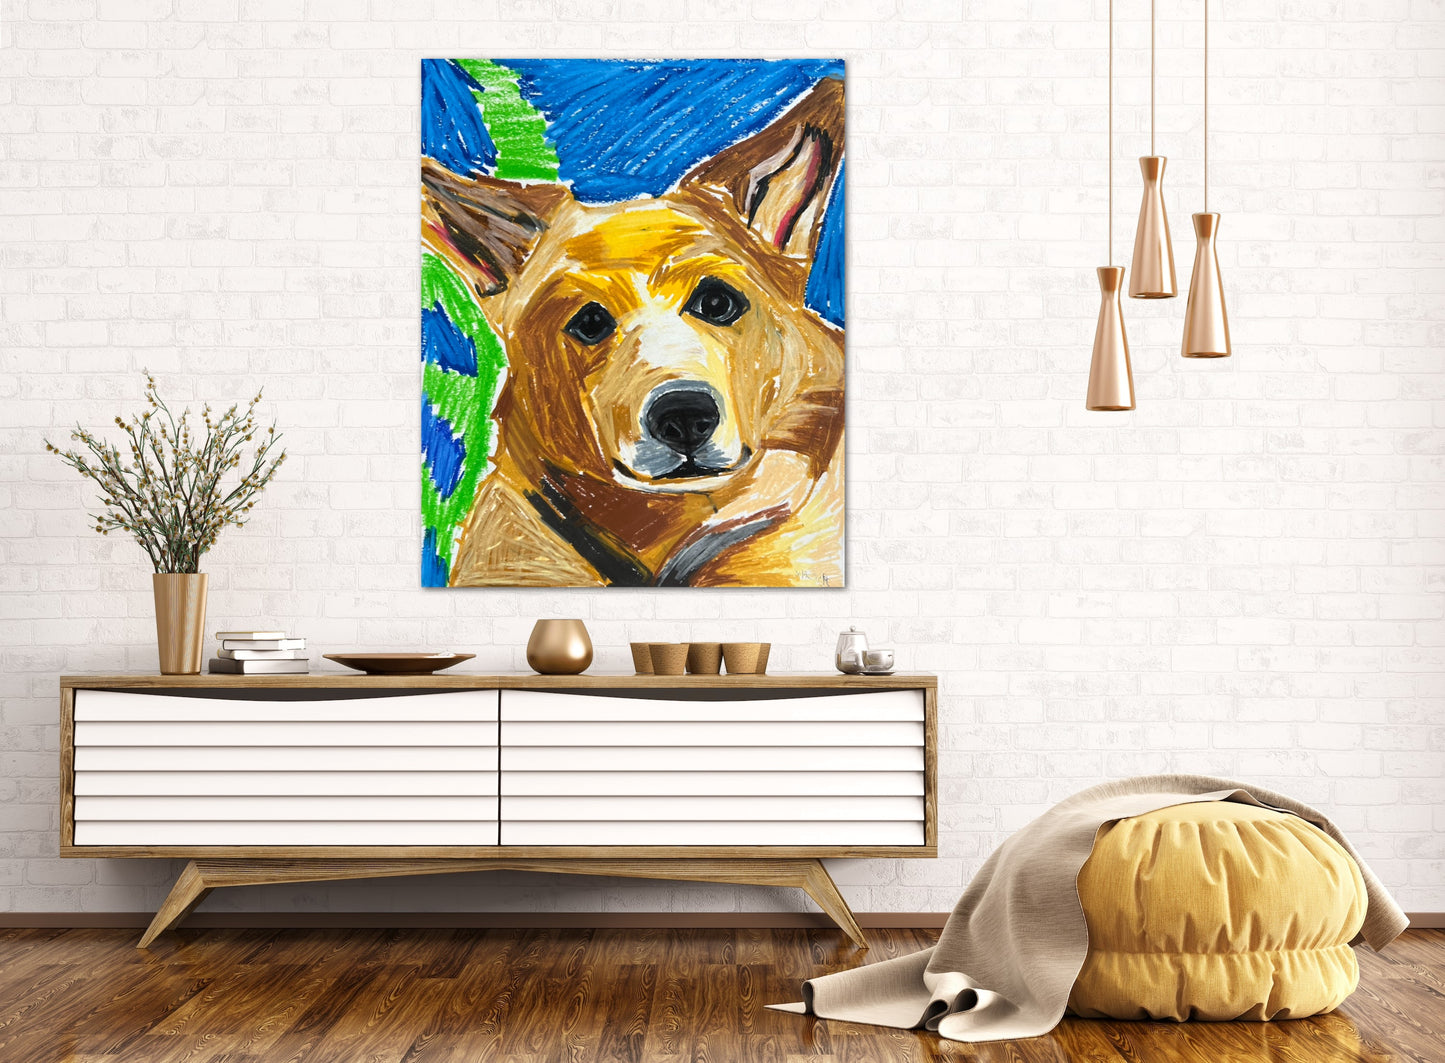 Archie The Corgi - Print, Poster, Stretched Canvas Print